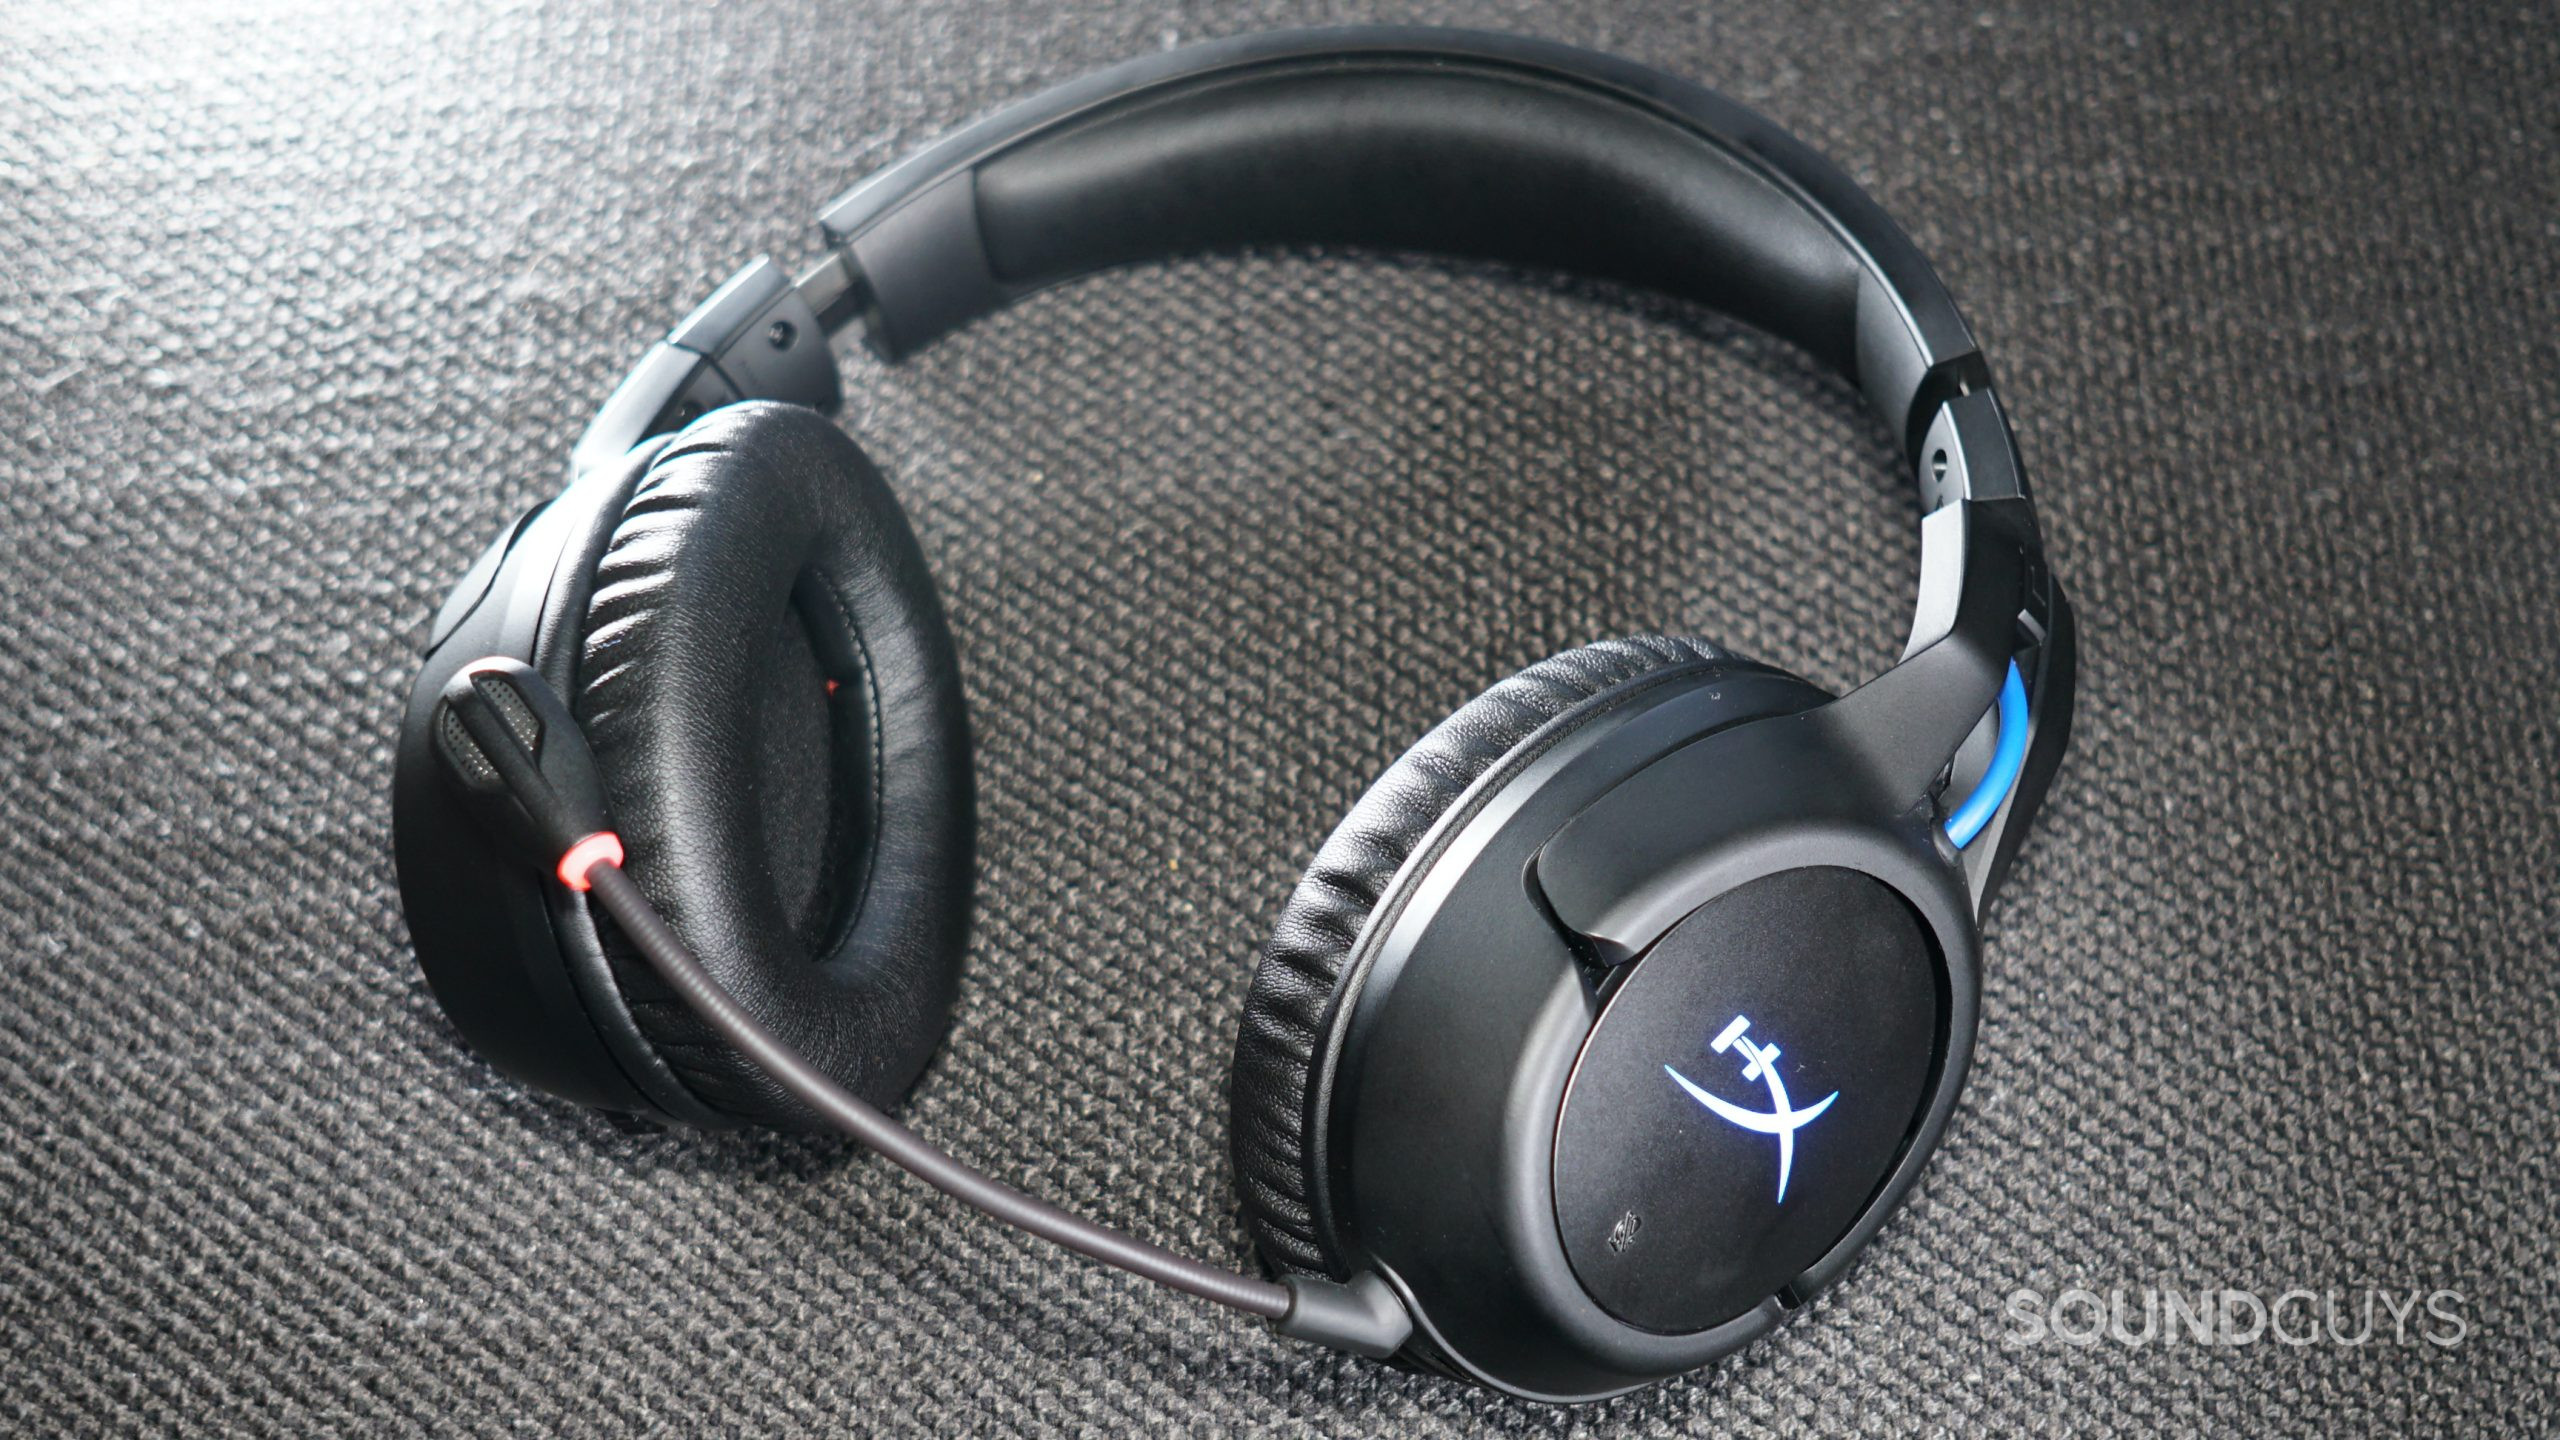 The HyperX Cloud Flight Wireless lays on a fabric surface.